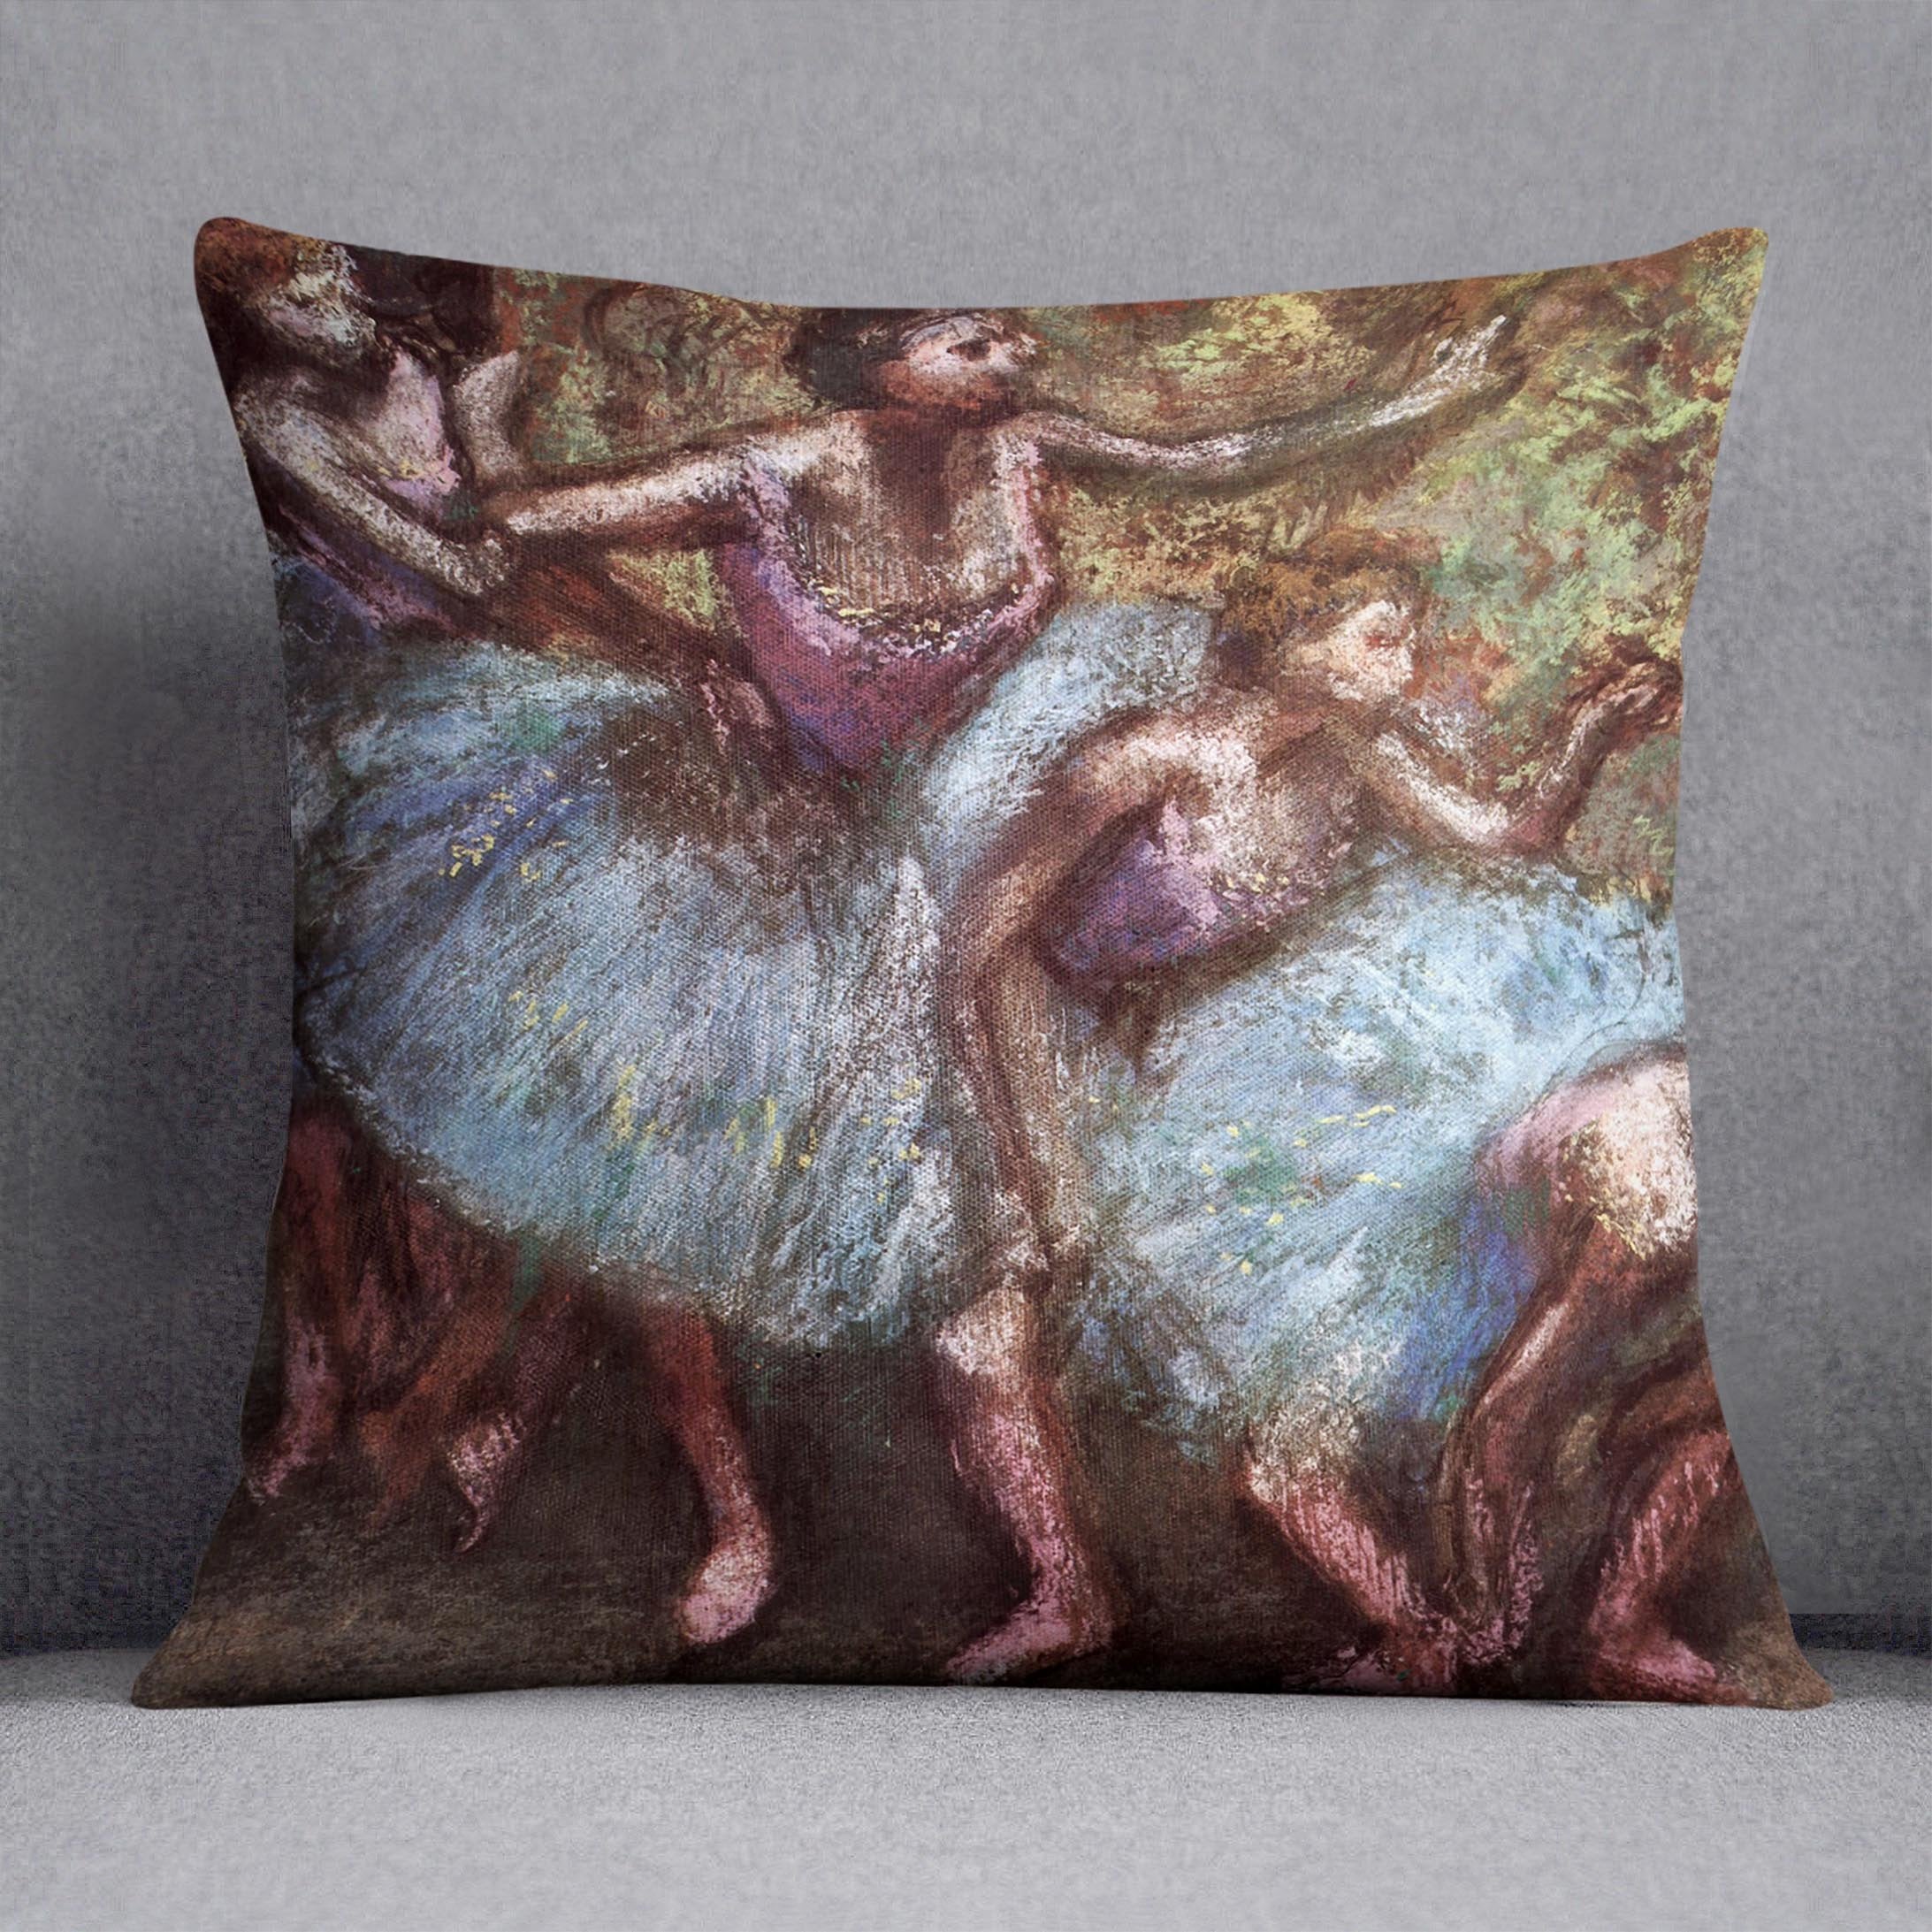 Four dancers behind the scenes 1 by Degas Cushion